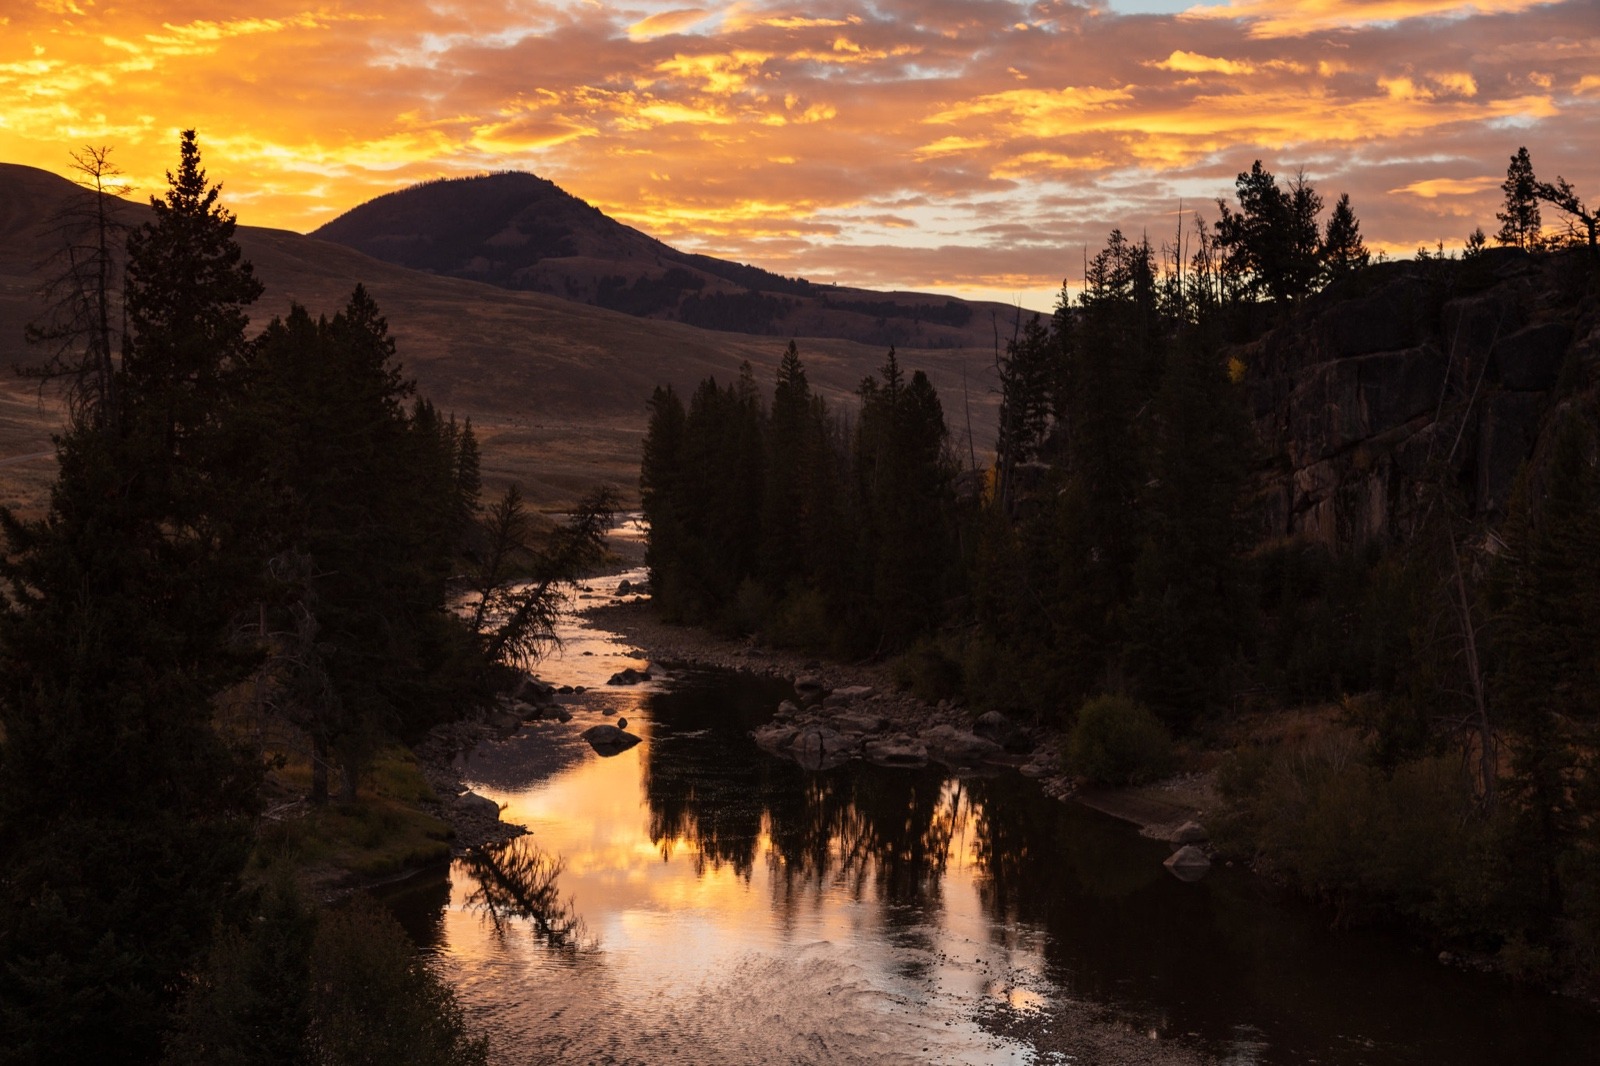 Sunrise over the Lamar River in in the Lamar Valley of Yellowstone National Park. A place today rich with wildlife, it was—and still is—identified as a homeland for the Crow with dozens of other tribes also having a cultural affiliation with area.  Photo courtesy Jacob W. Frank/National Park Service